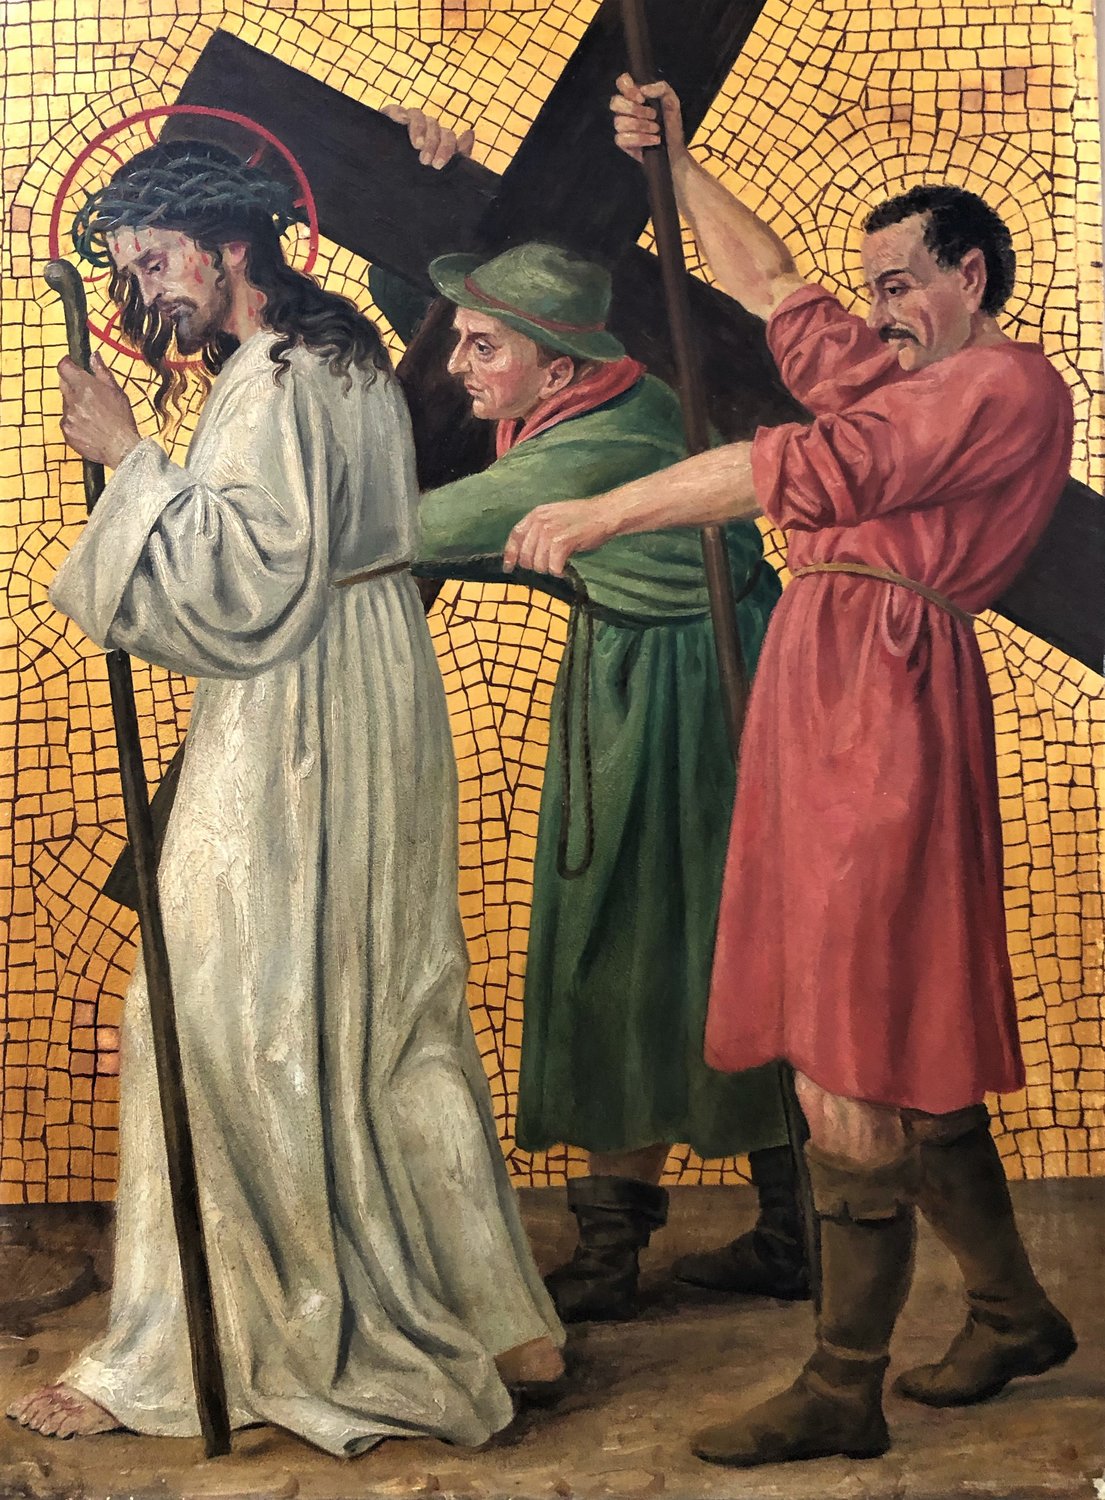 The Fifth Station: “Simon of Cyrene Helps Jesus Carry His Cross,” an oil painting on copper, is one of 14 Stations undergoing restoration in order to be placed in the Cathedral of St. Joseph in Jefferson City as part of a substantial renovation. The Stations are from a now-closed Catholic church near Marion, Ohio.